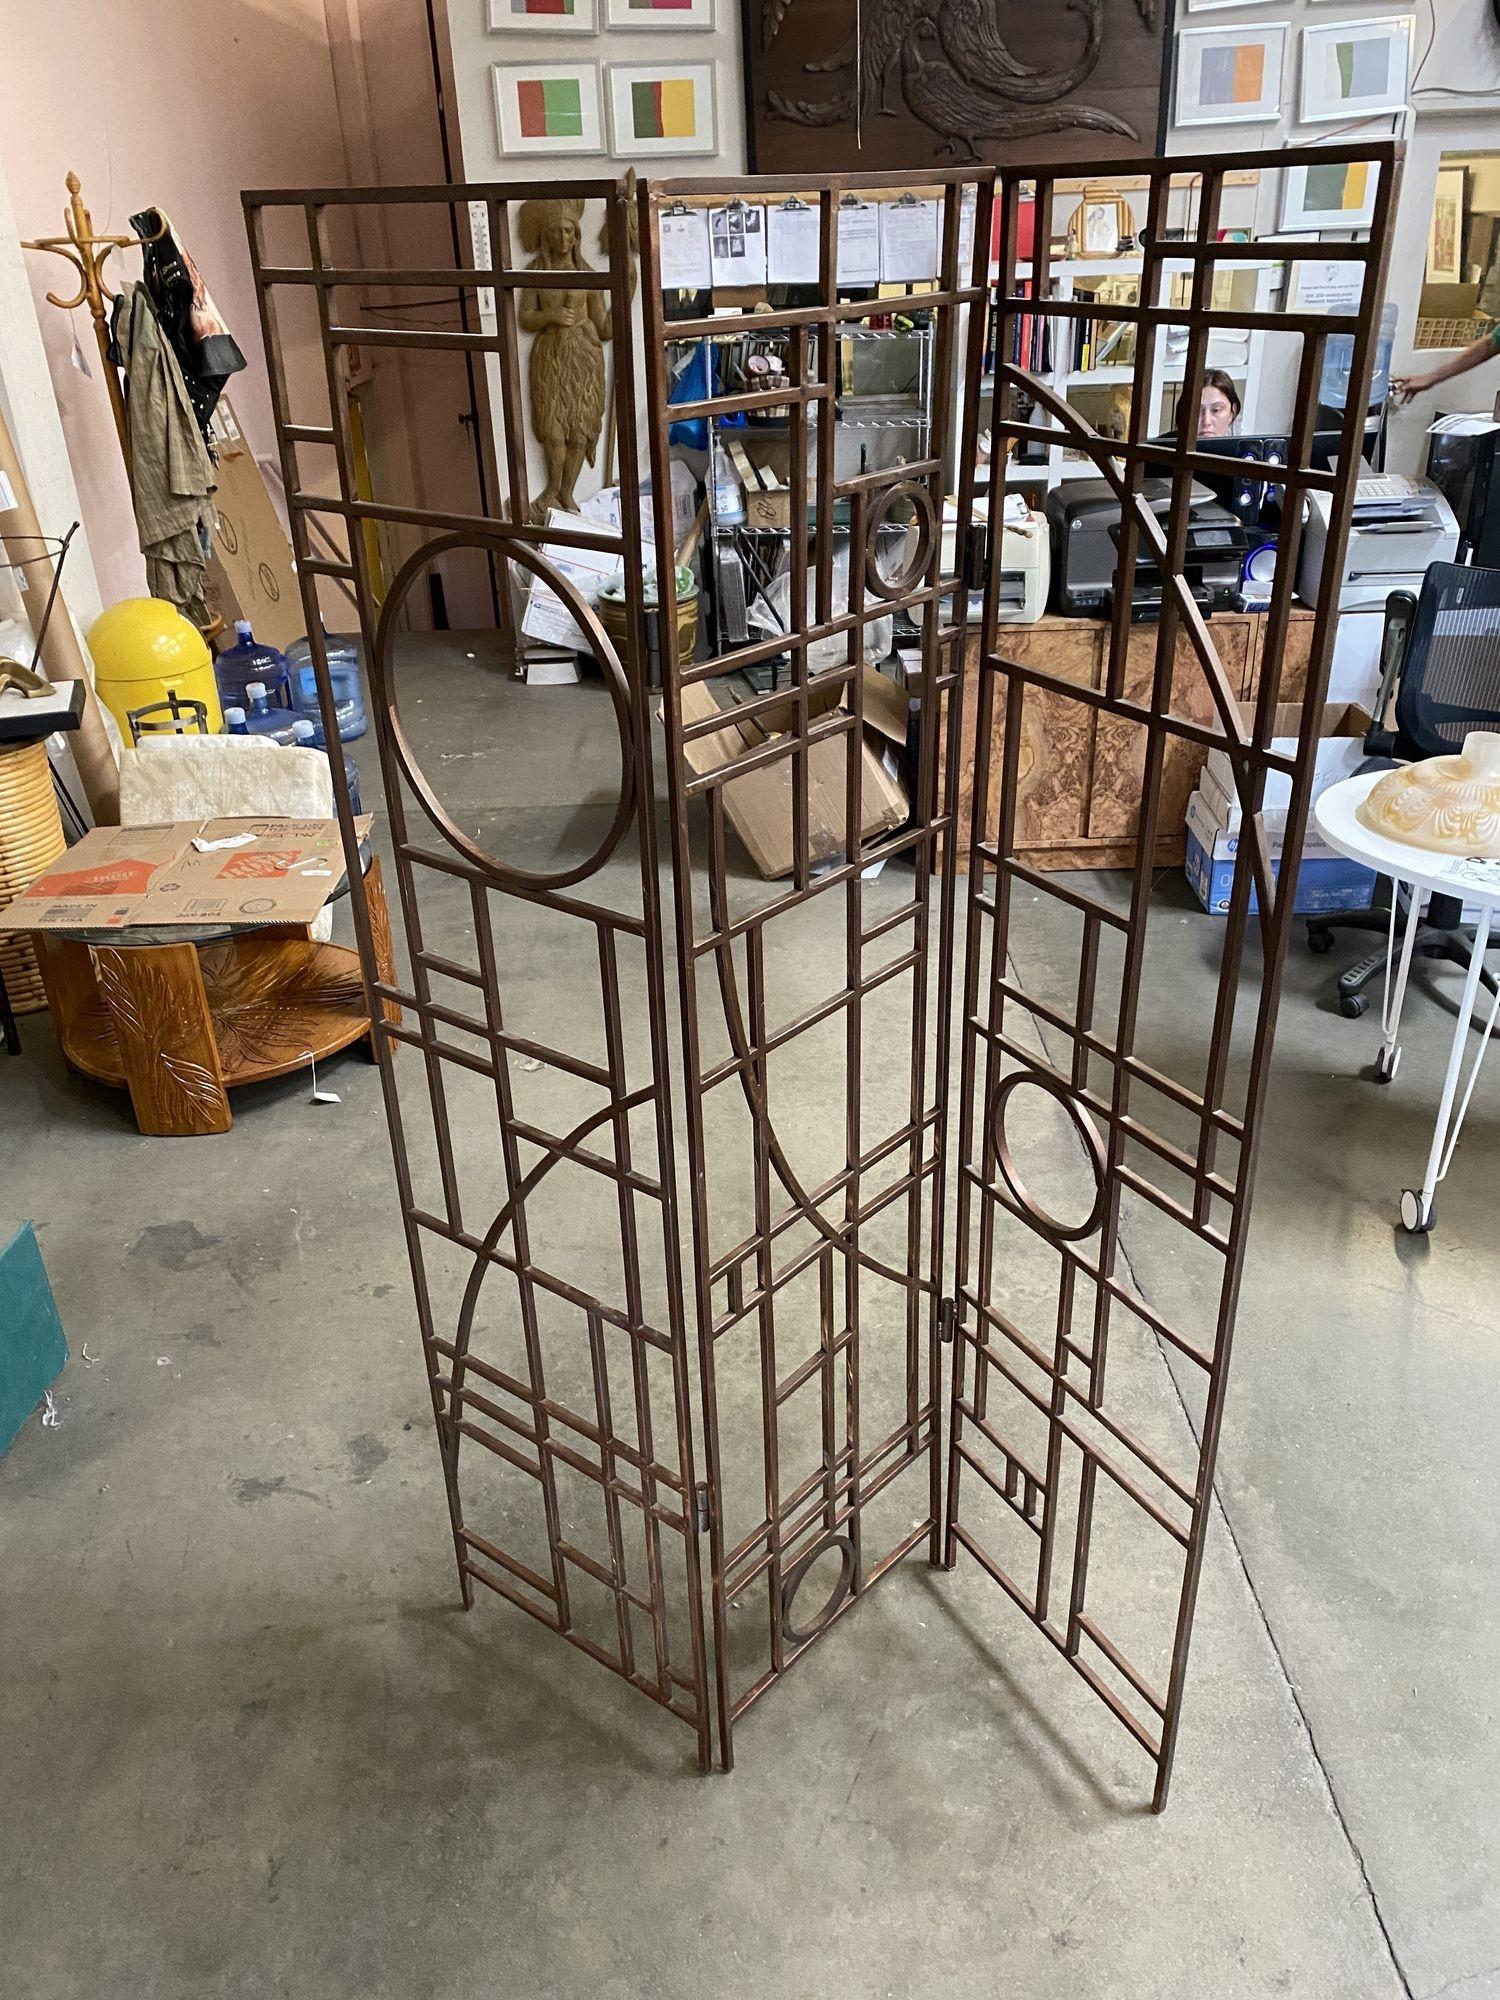 Frank Lloyd Wright inspired Neo Art Deco copper tone 3-panel room divider screen. This handmade custom boutique furniture piece was made during the Art Deco revival of the 1970s/1980s featuring a steel frame finished in a copper tone with Bauhaus